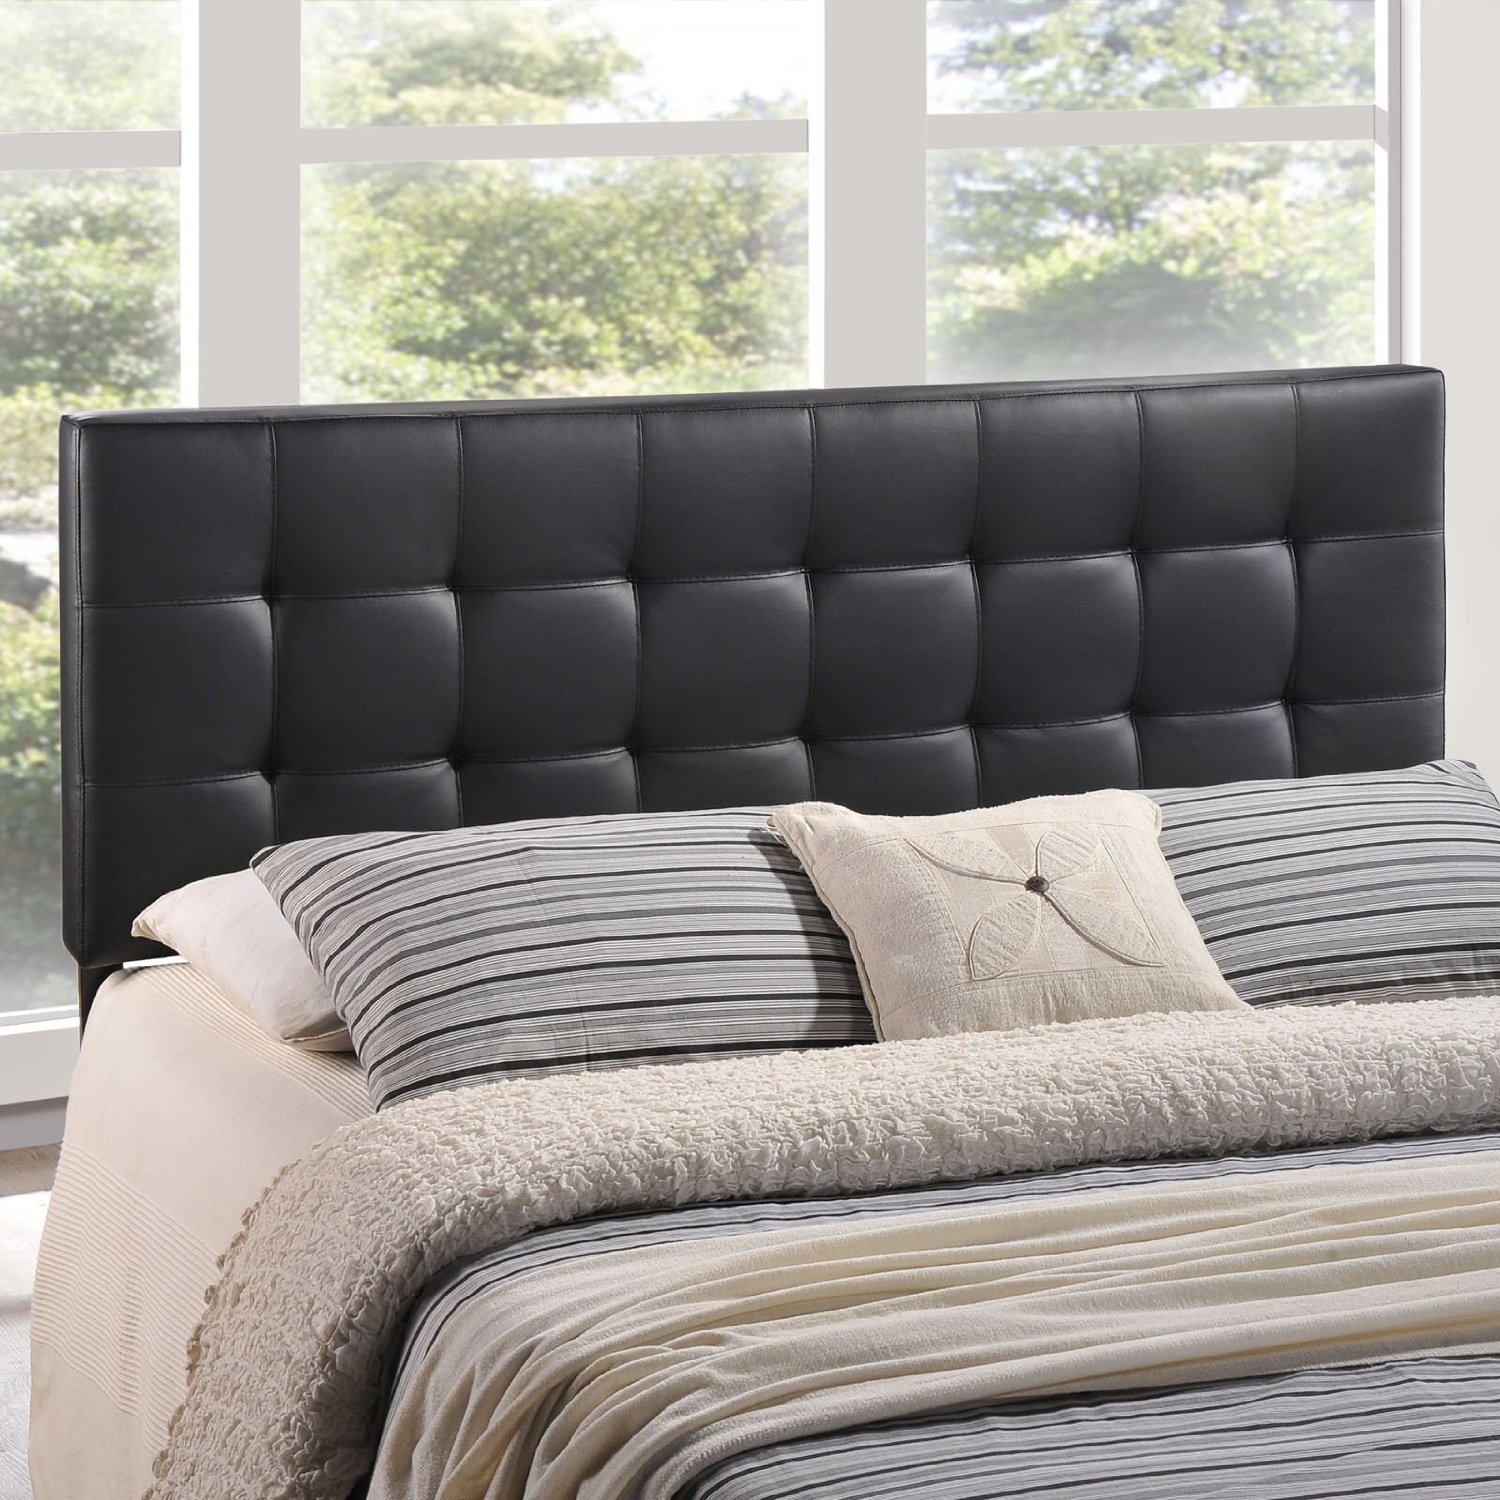 King Size Upholstered Headboard, only $102.54!